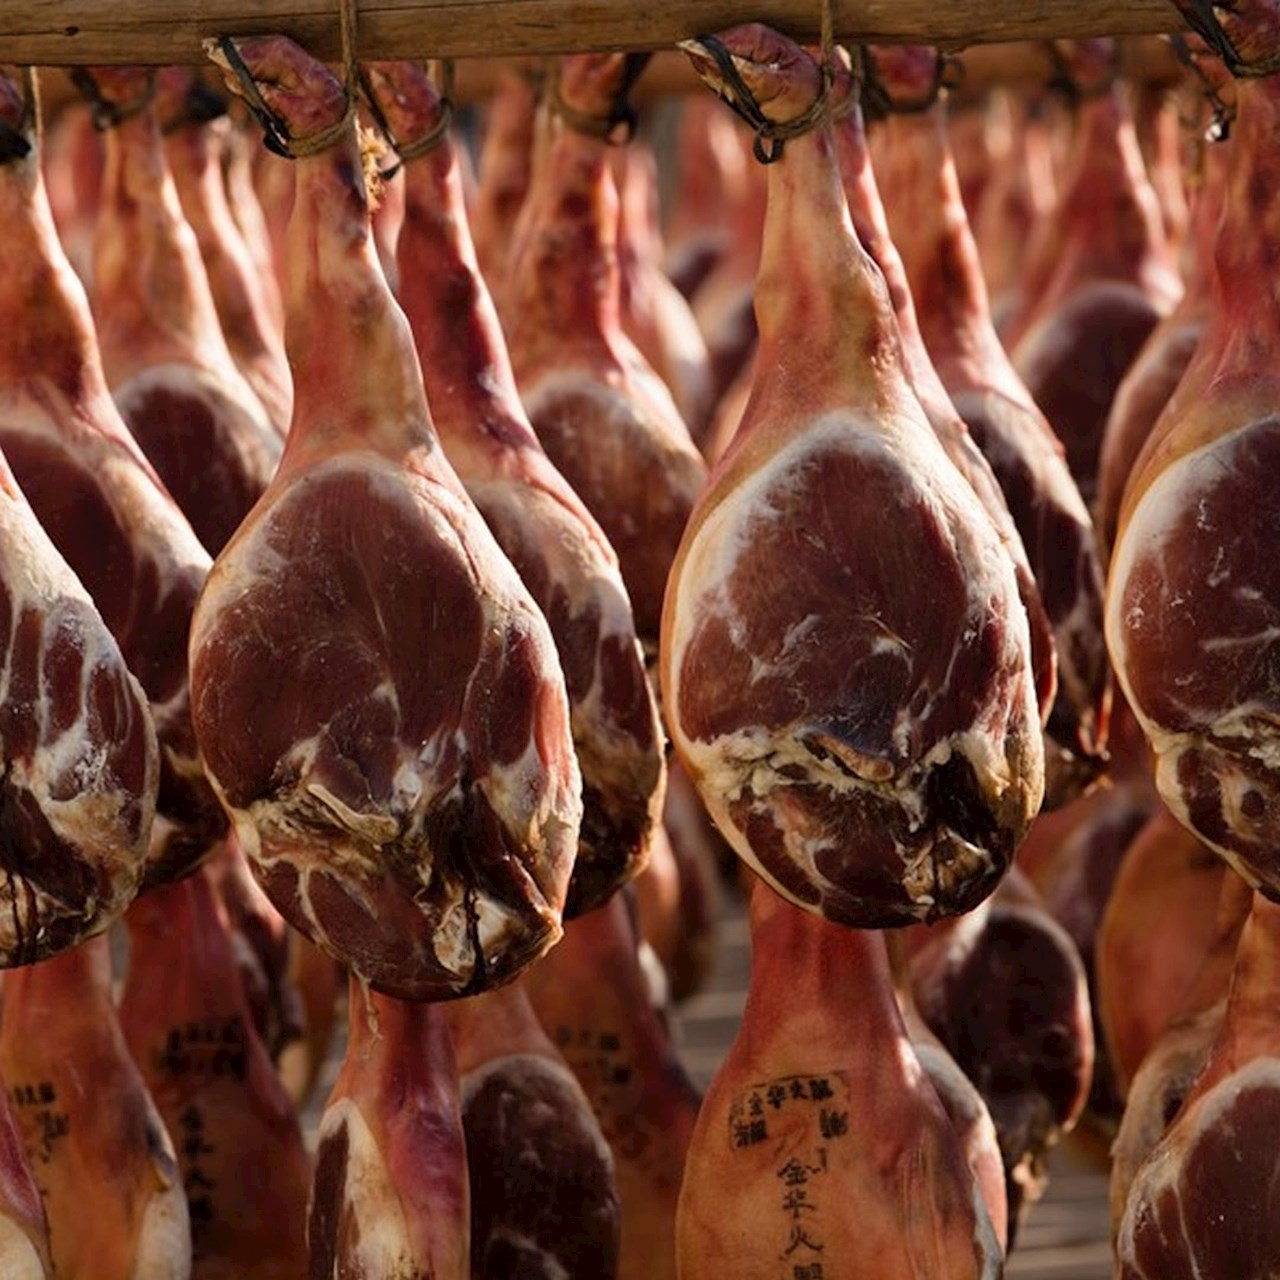 It's easily possible that the oldest cured ham in the world comes from China